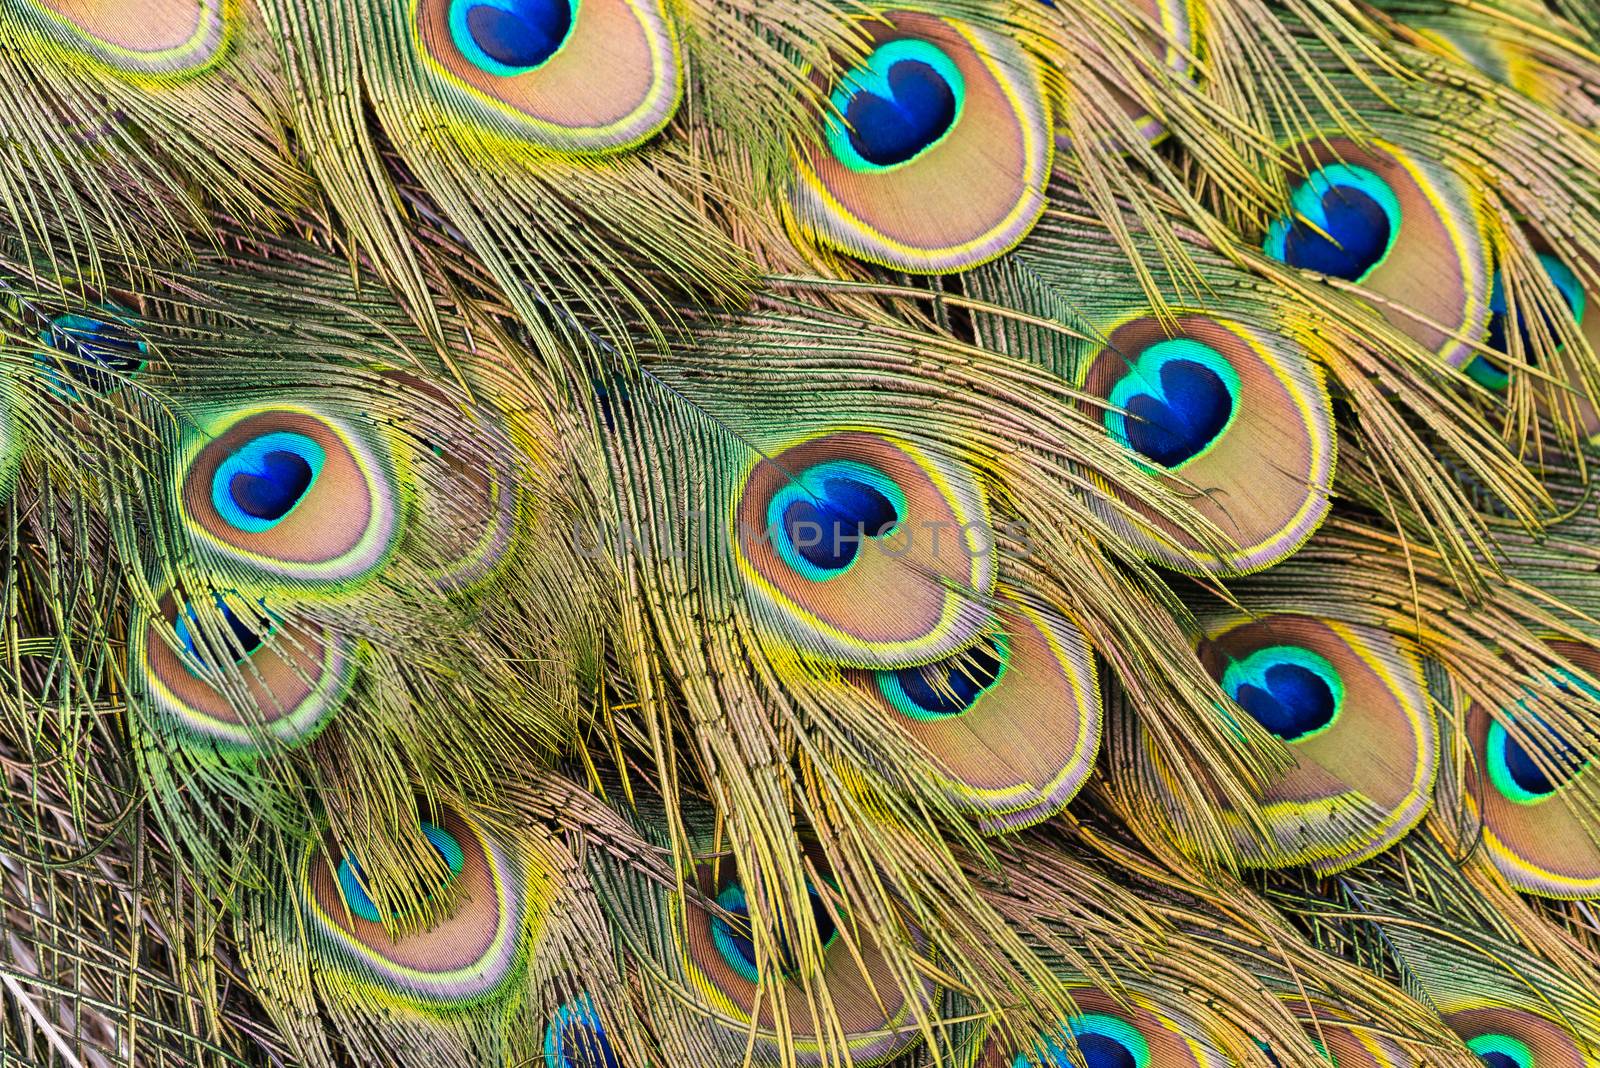 Peacock Train Feathers by justtscott